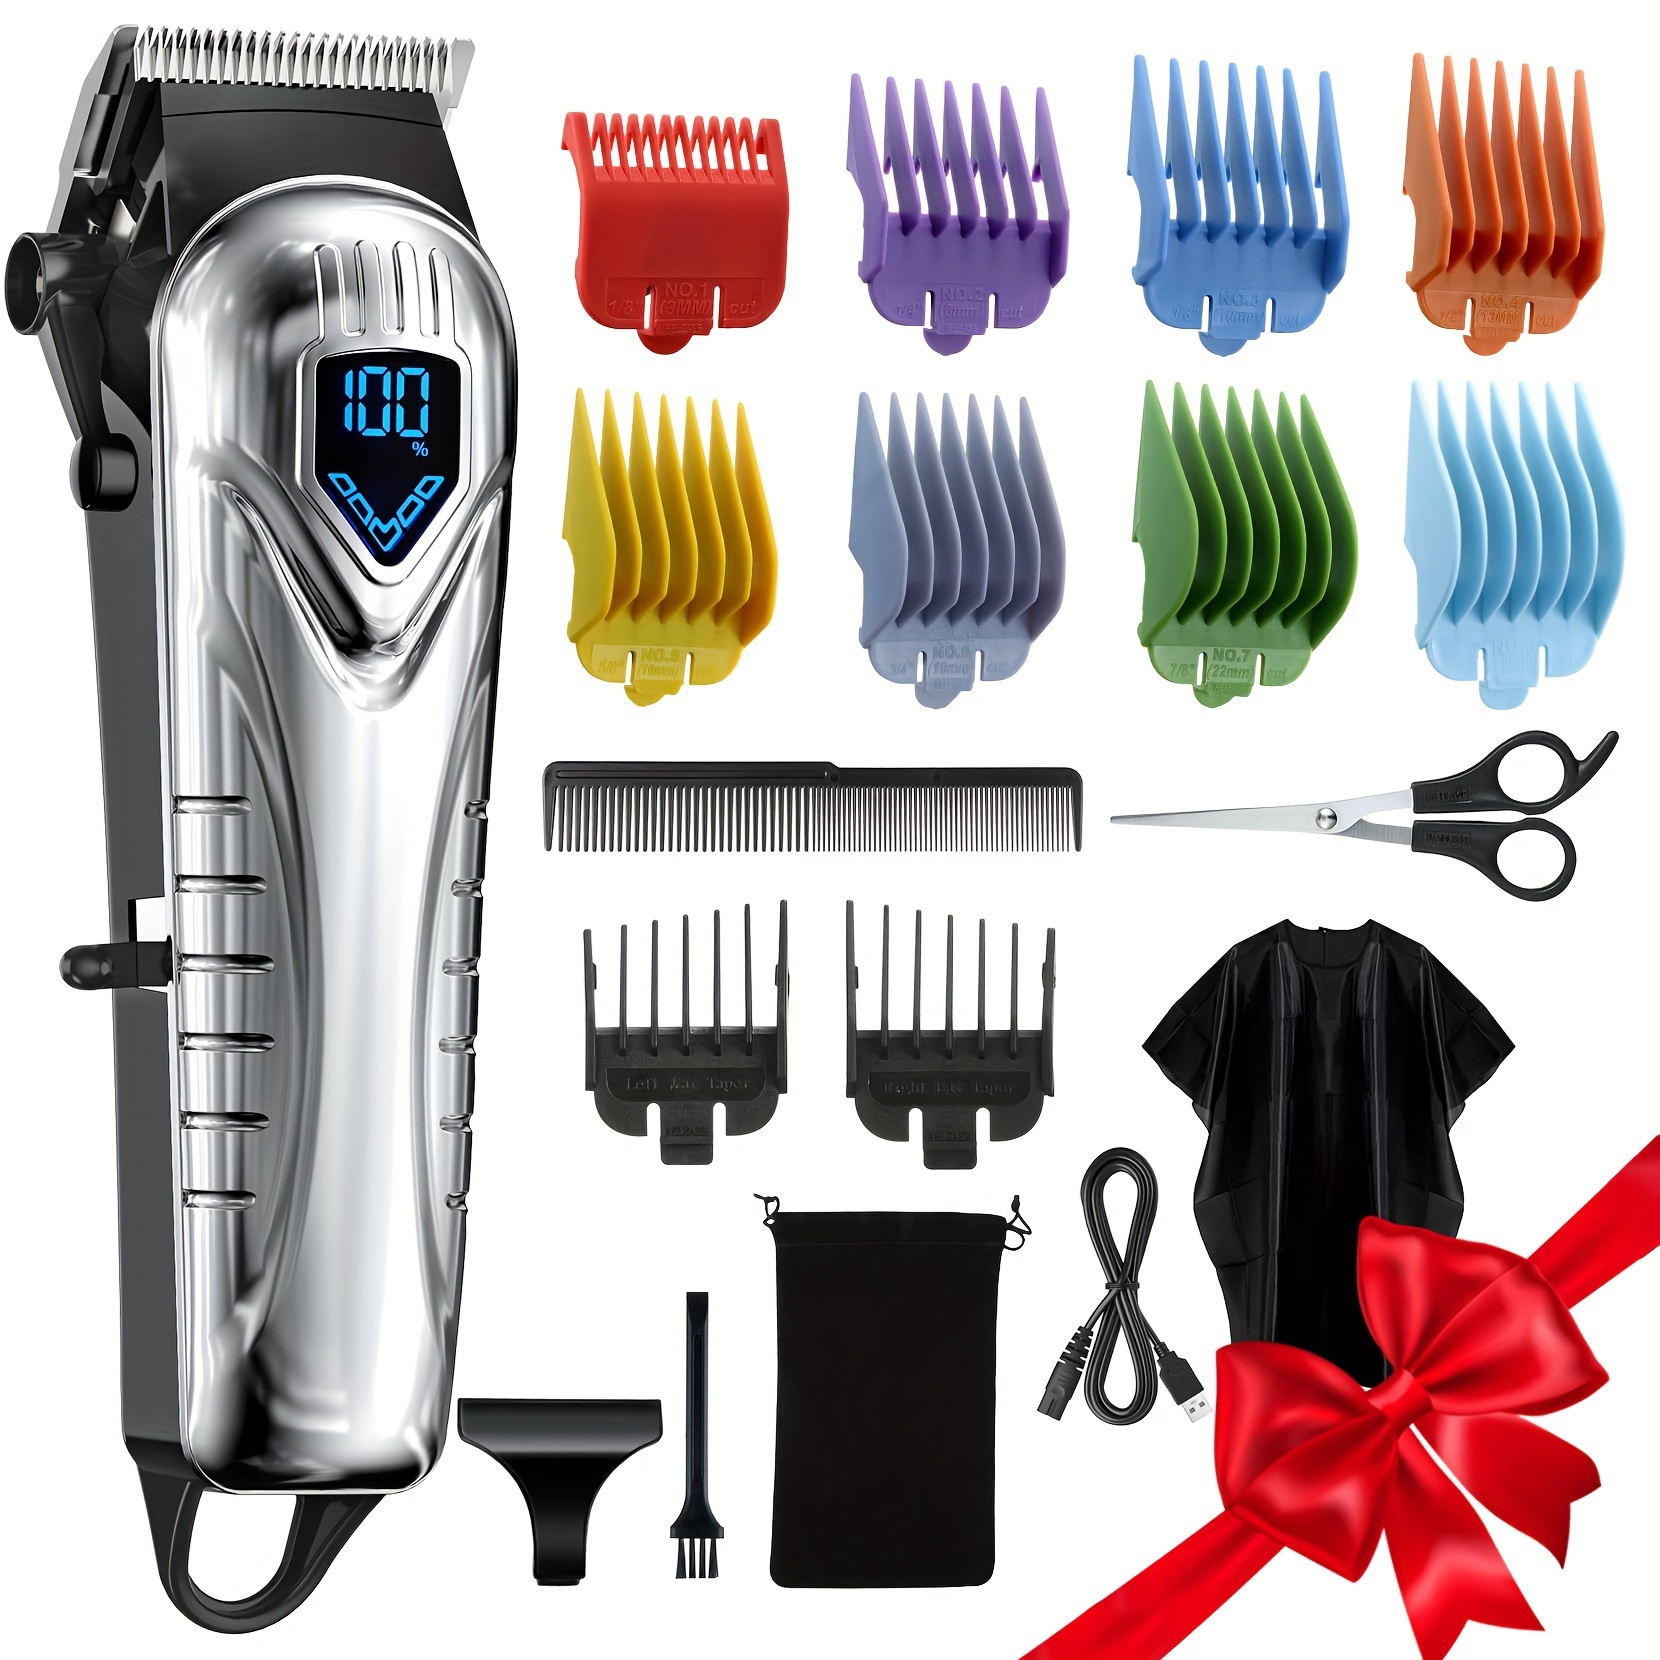 

Hair Clipper For Men And Women, 5-hour Rechargeable Haircut Set With 10 Combs, Led Display, Low Noise Professional Beard Trimmer Barber With Scissors, Cape, Multi-hair Styles